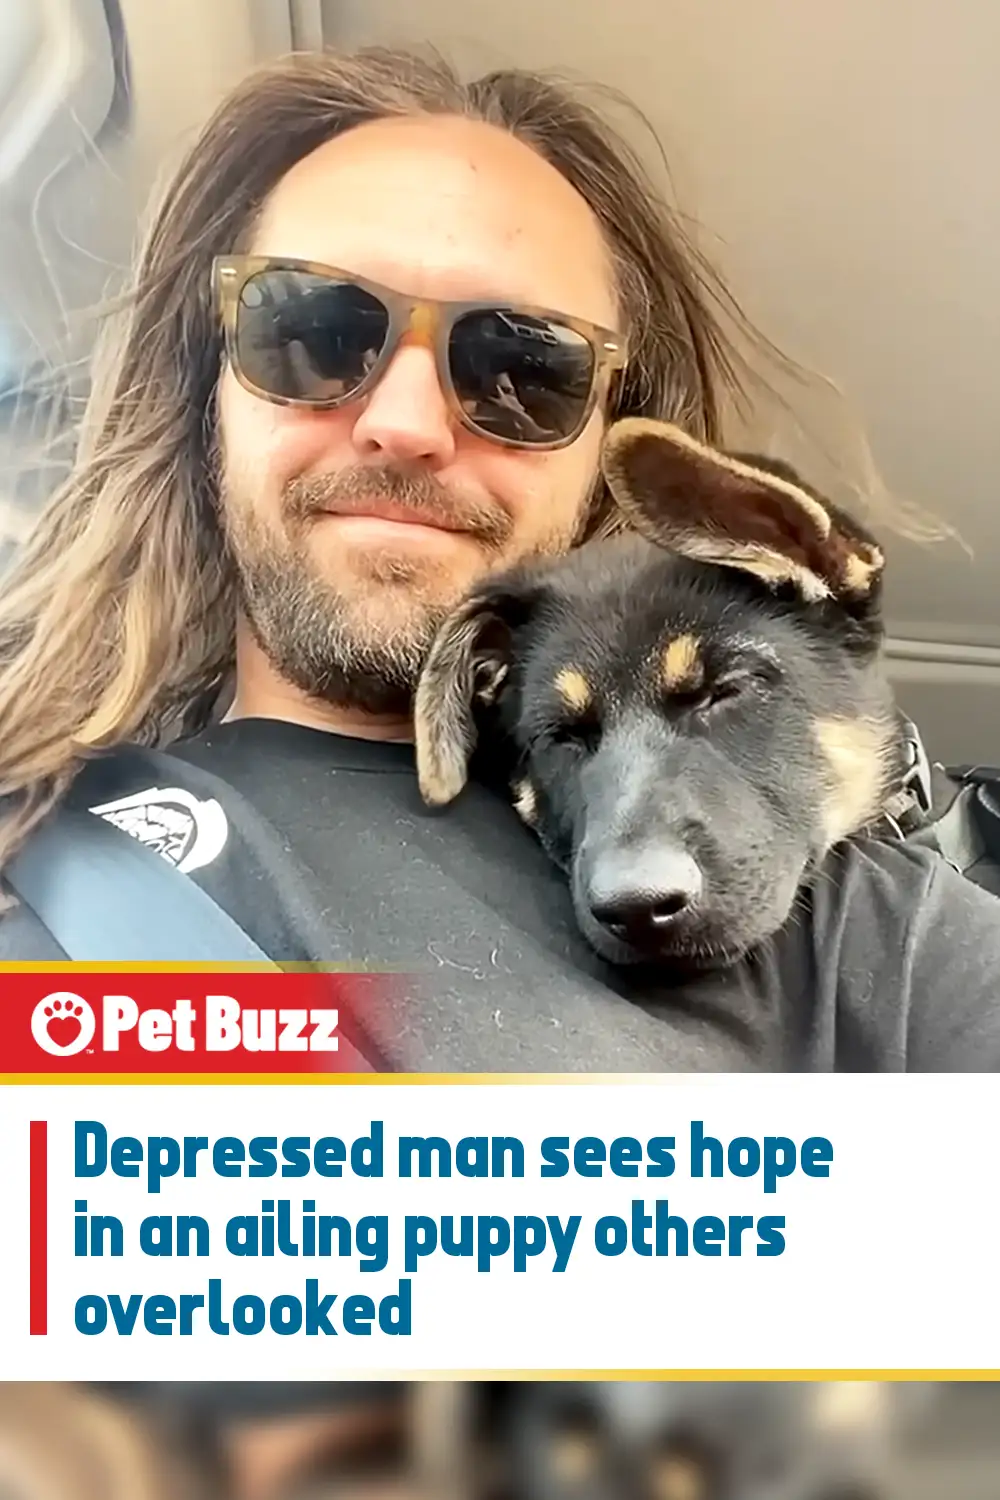 Depressed man sees hope in an ailing puppy others overlooked